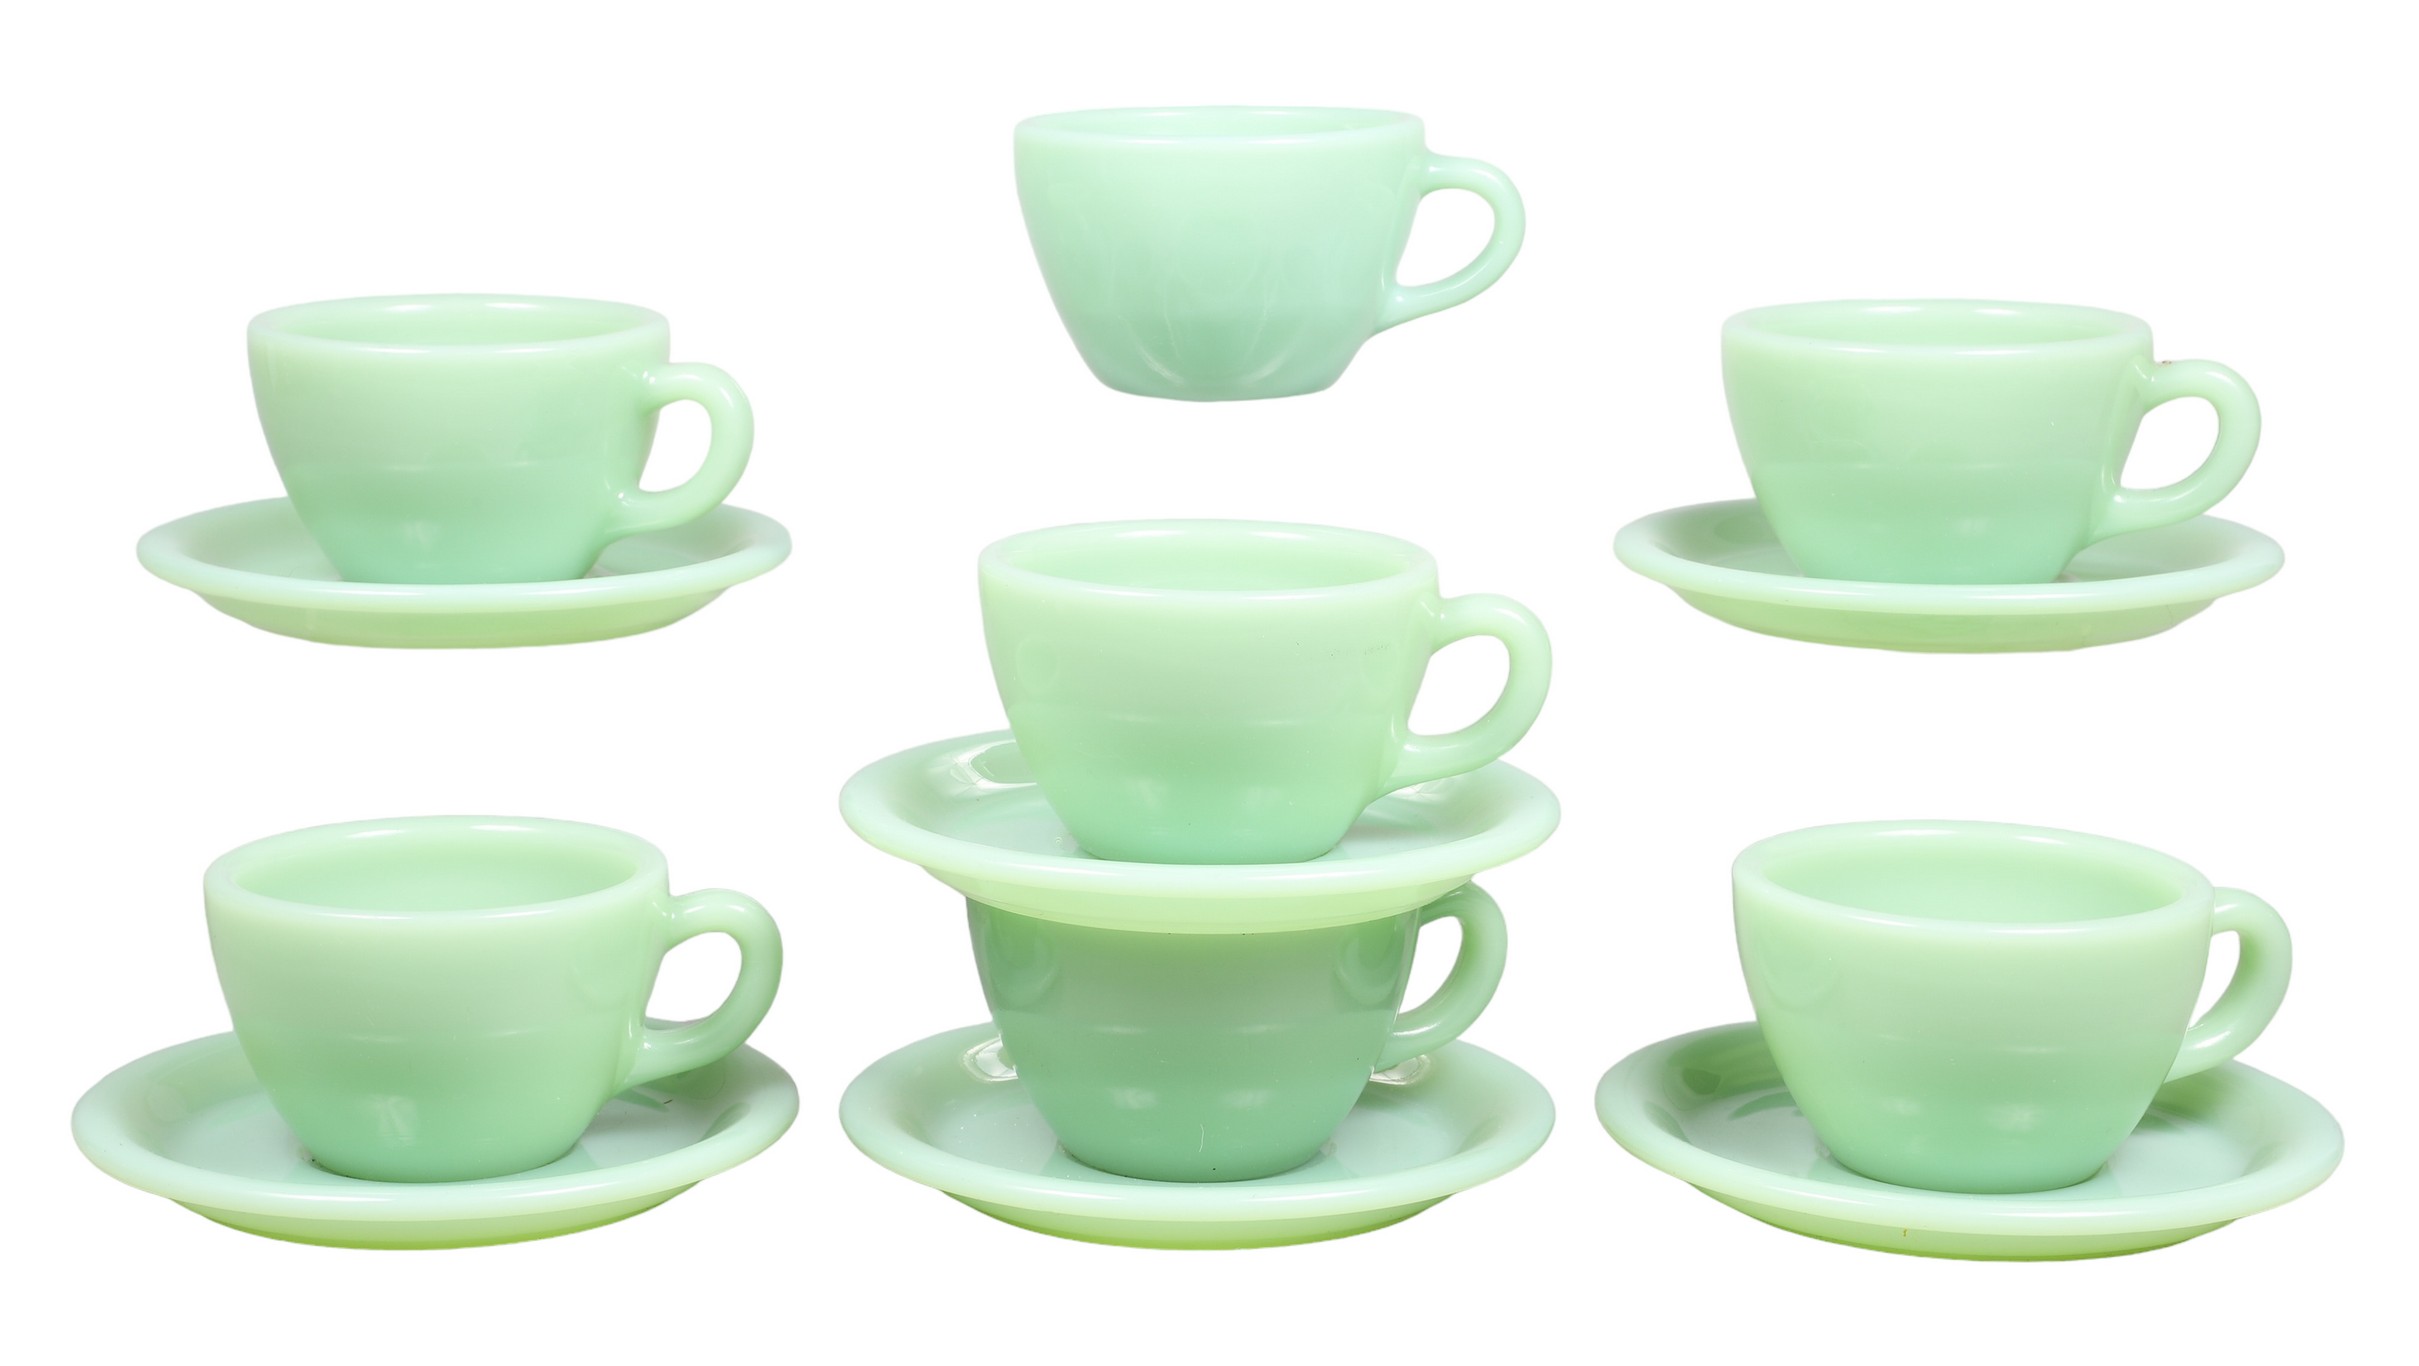 Seven teacups and six saucers of